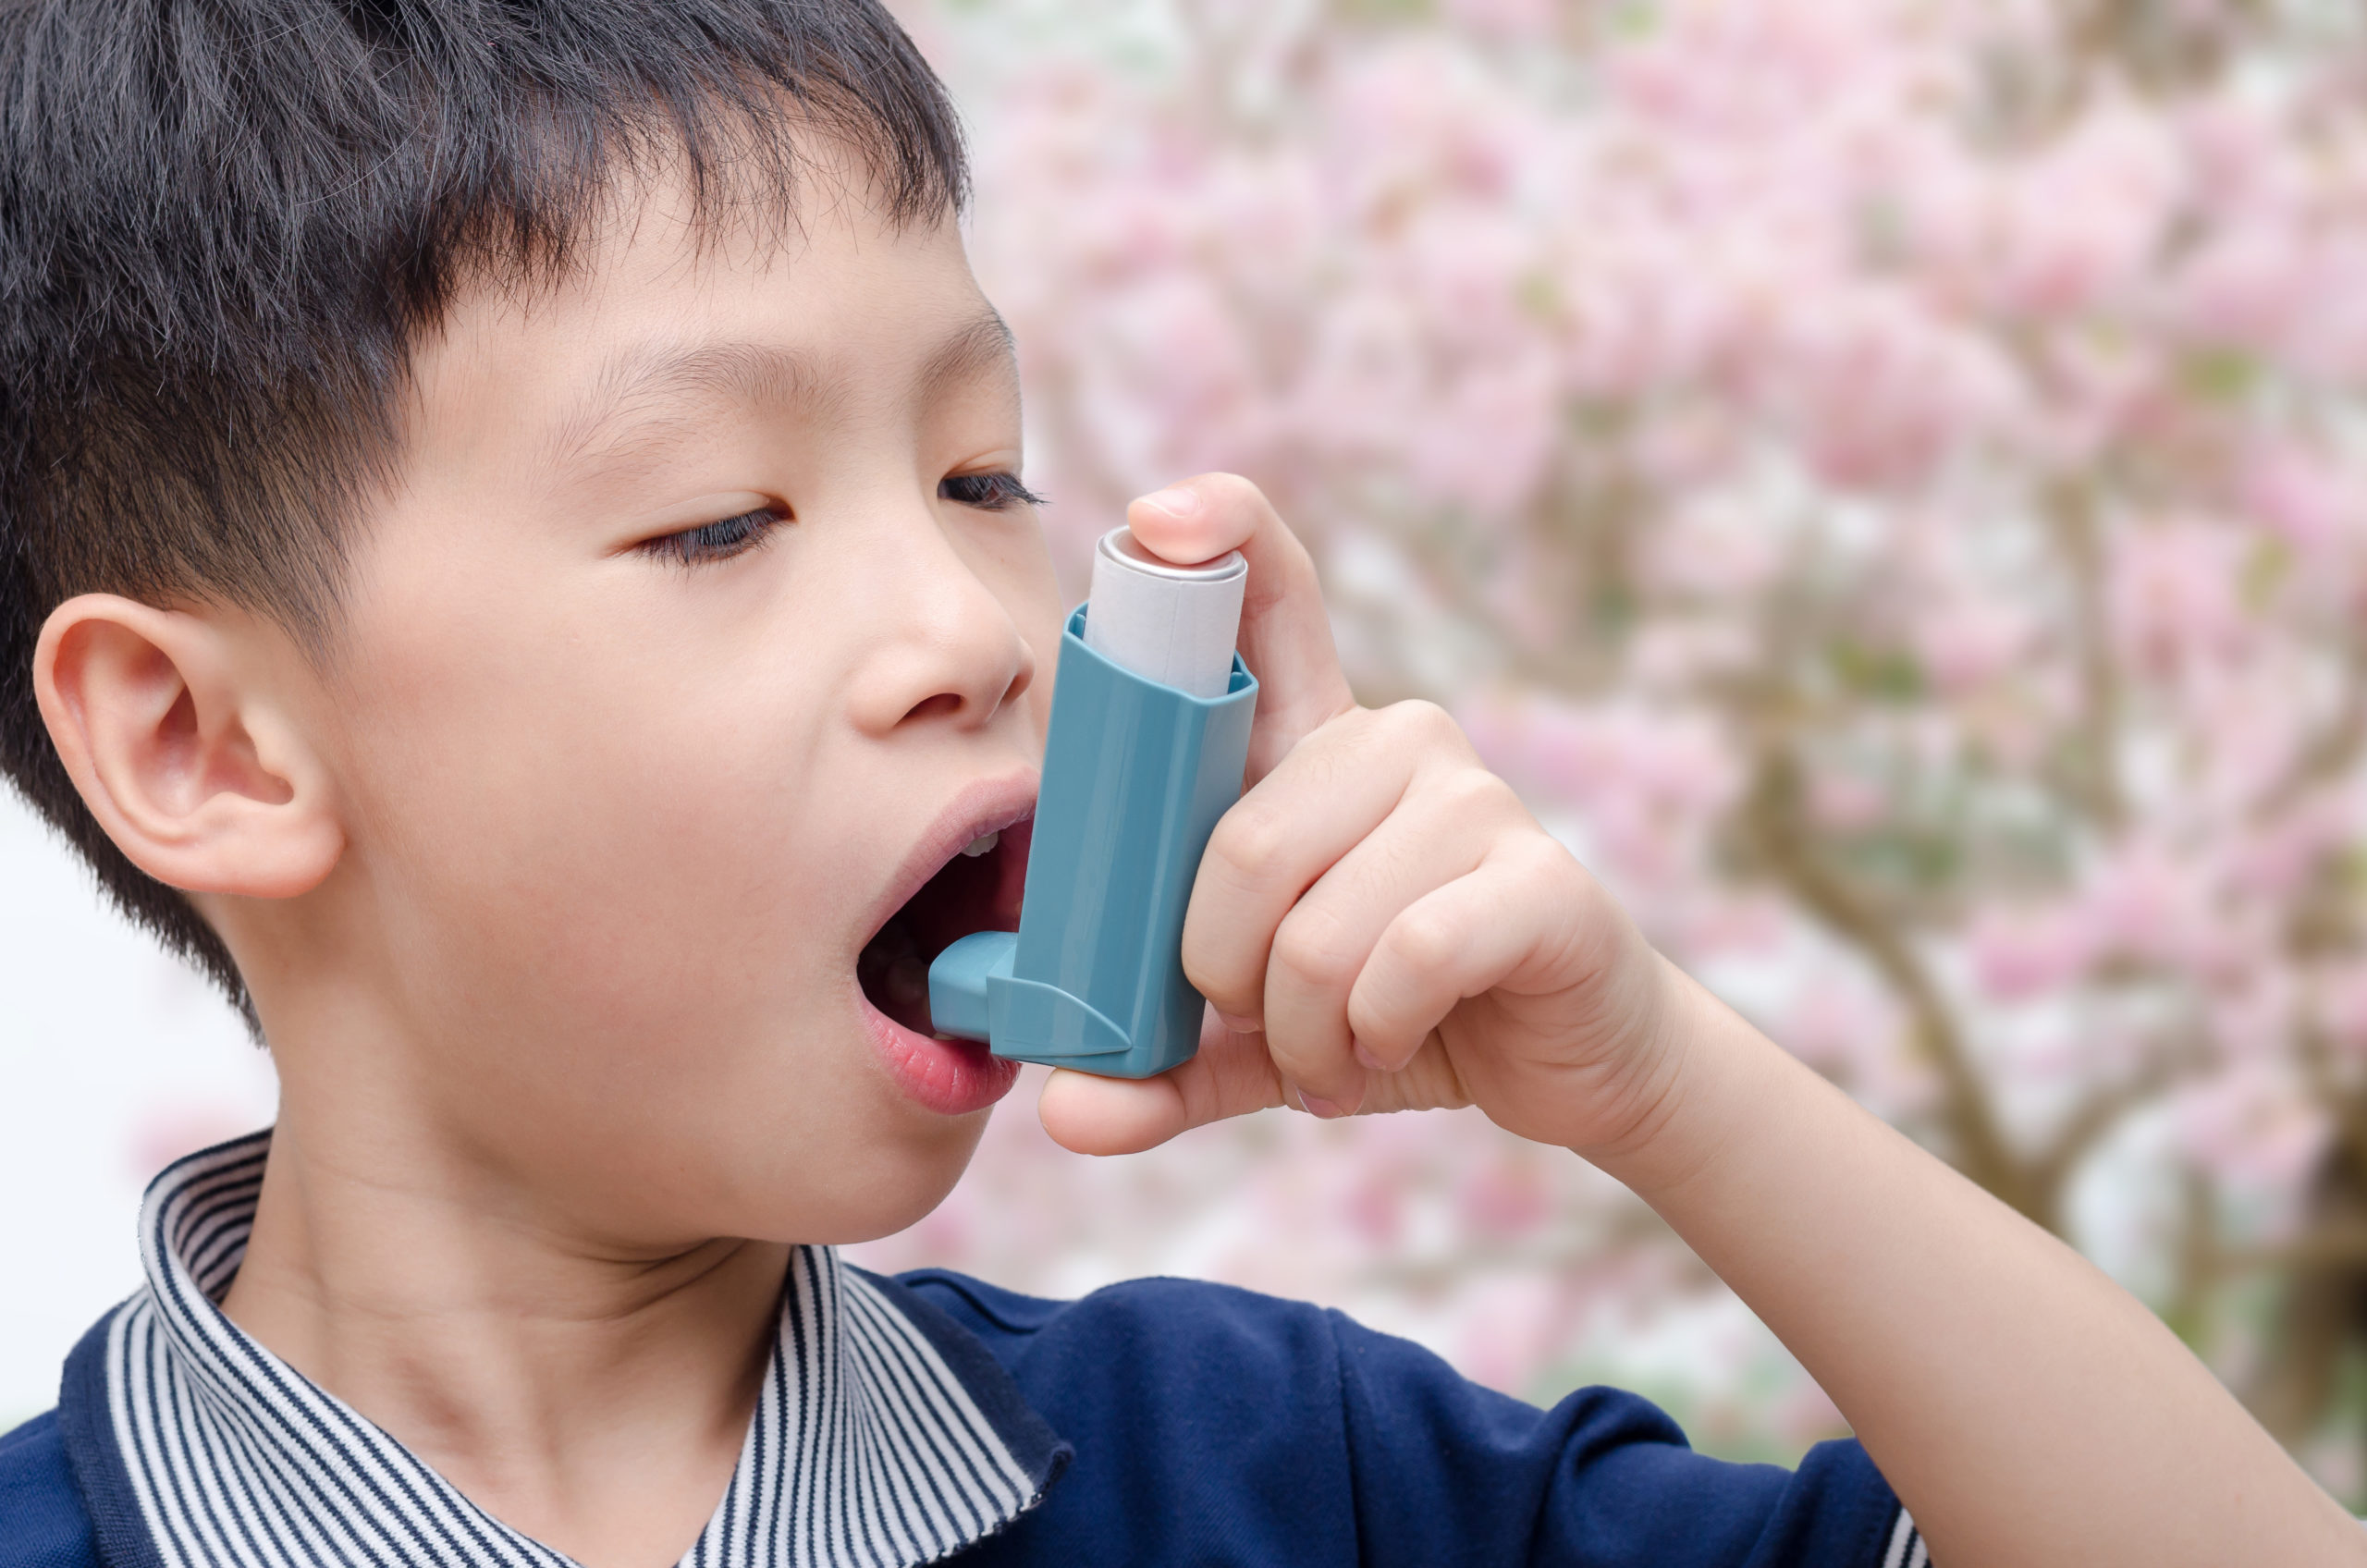 Image of a young boy standing in front of a floral tree and holding an inhaler to his mouth